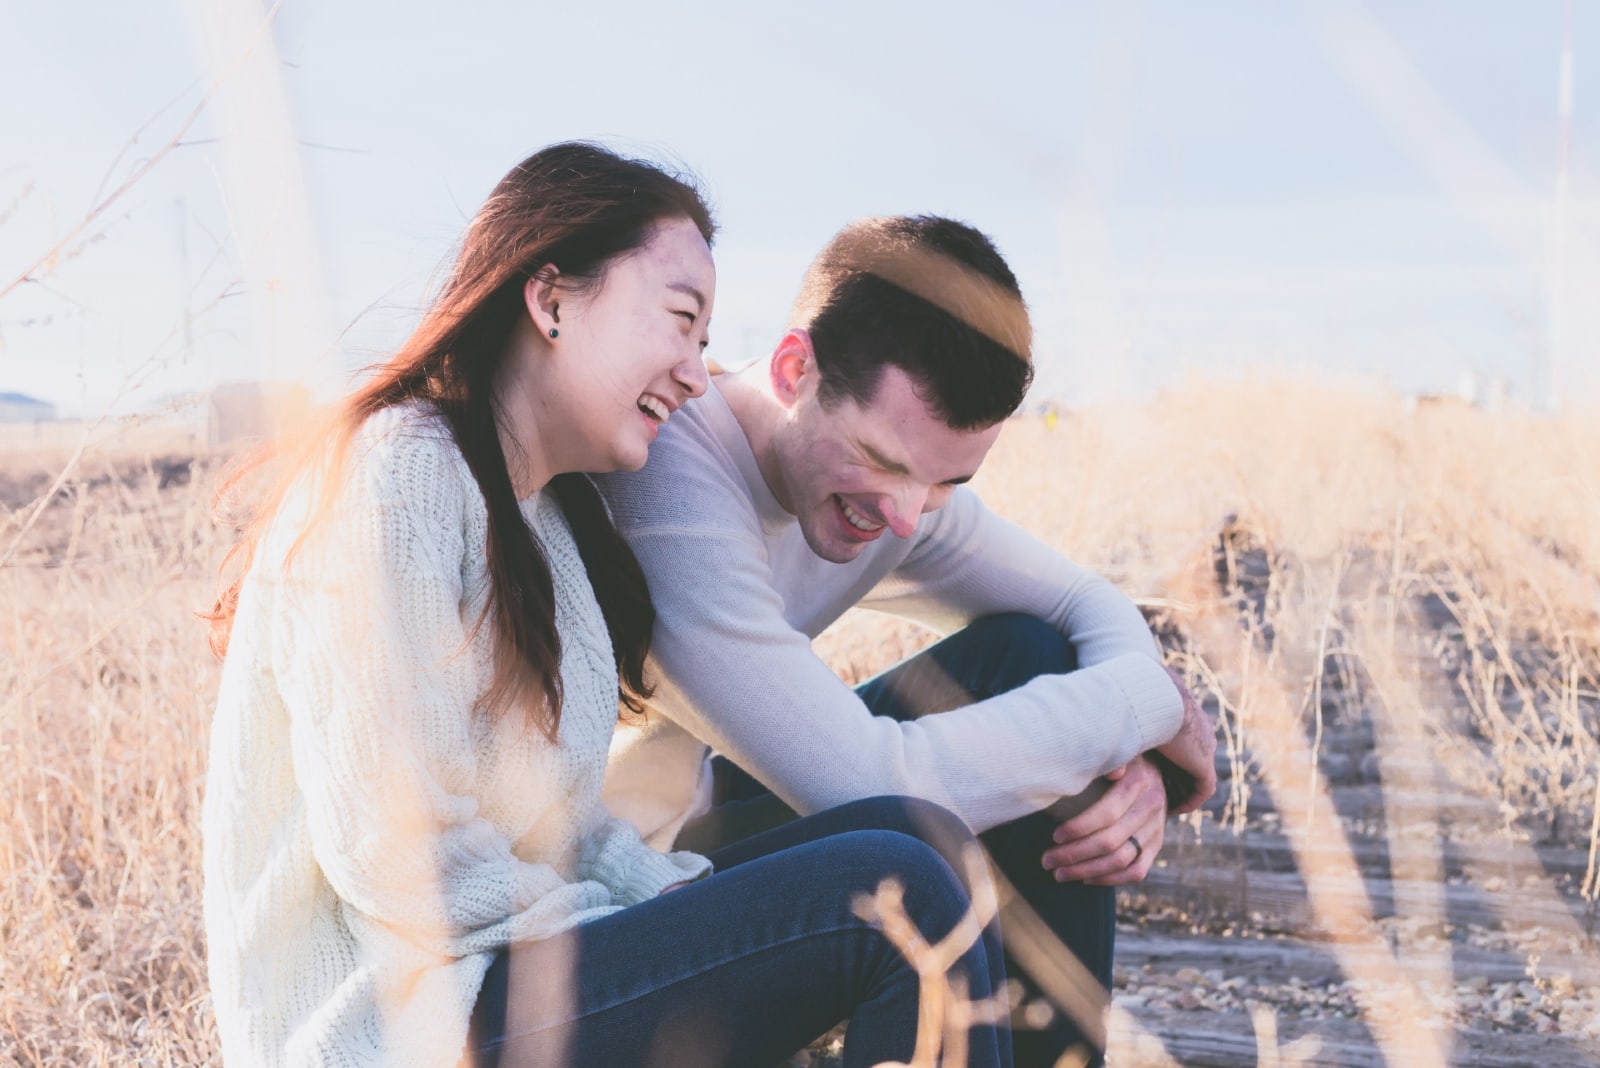 man and woman laughing while sitting by the tracks